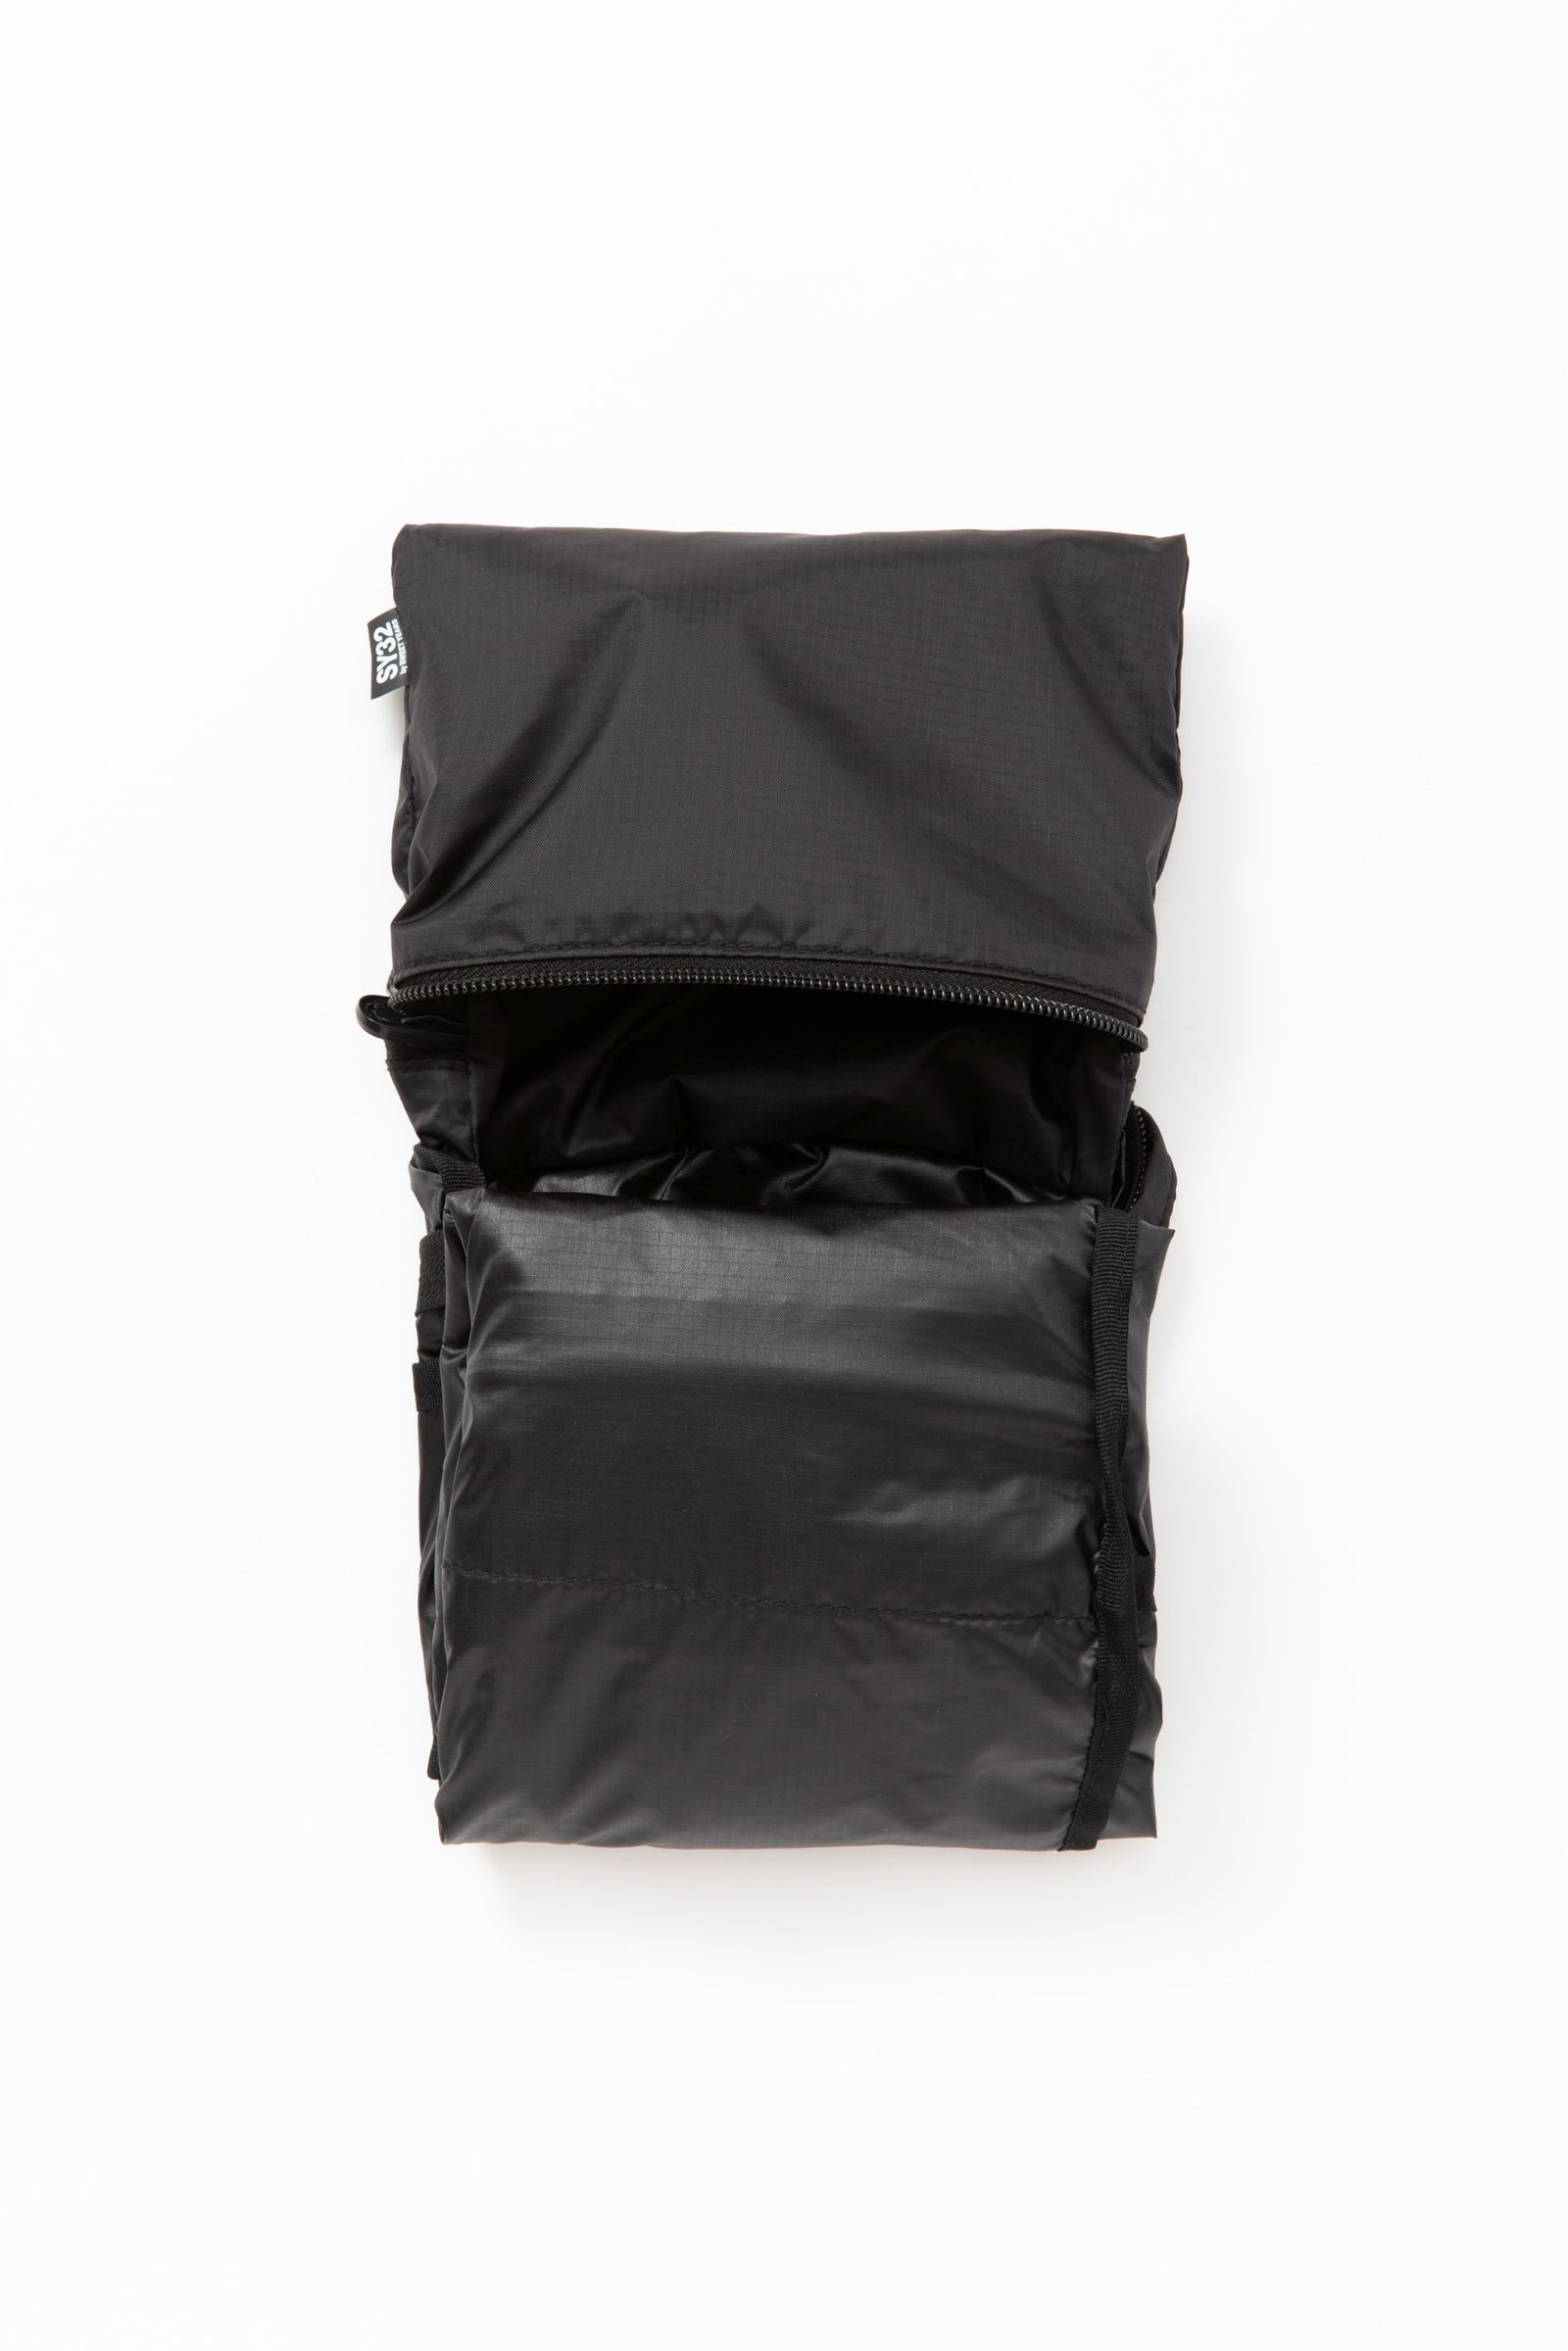 SY32 by SWEET YEARS - SY32 PACKABLE ECO BACKPACK / 10590 / エコ